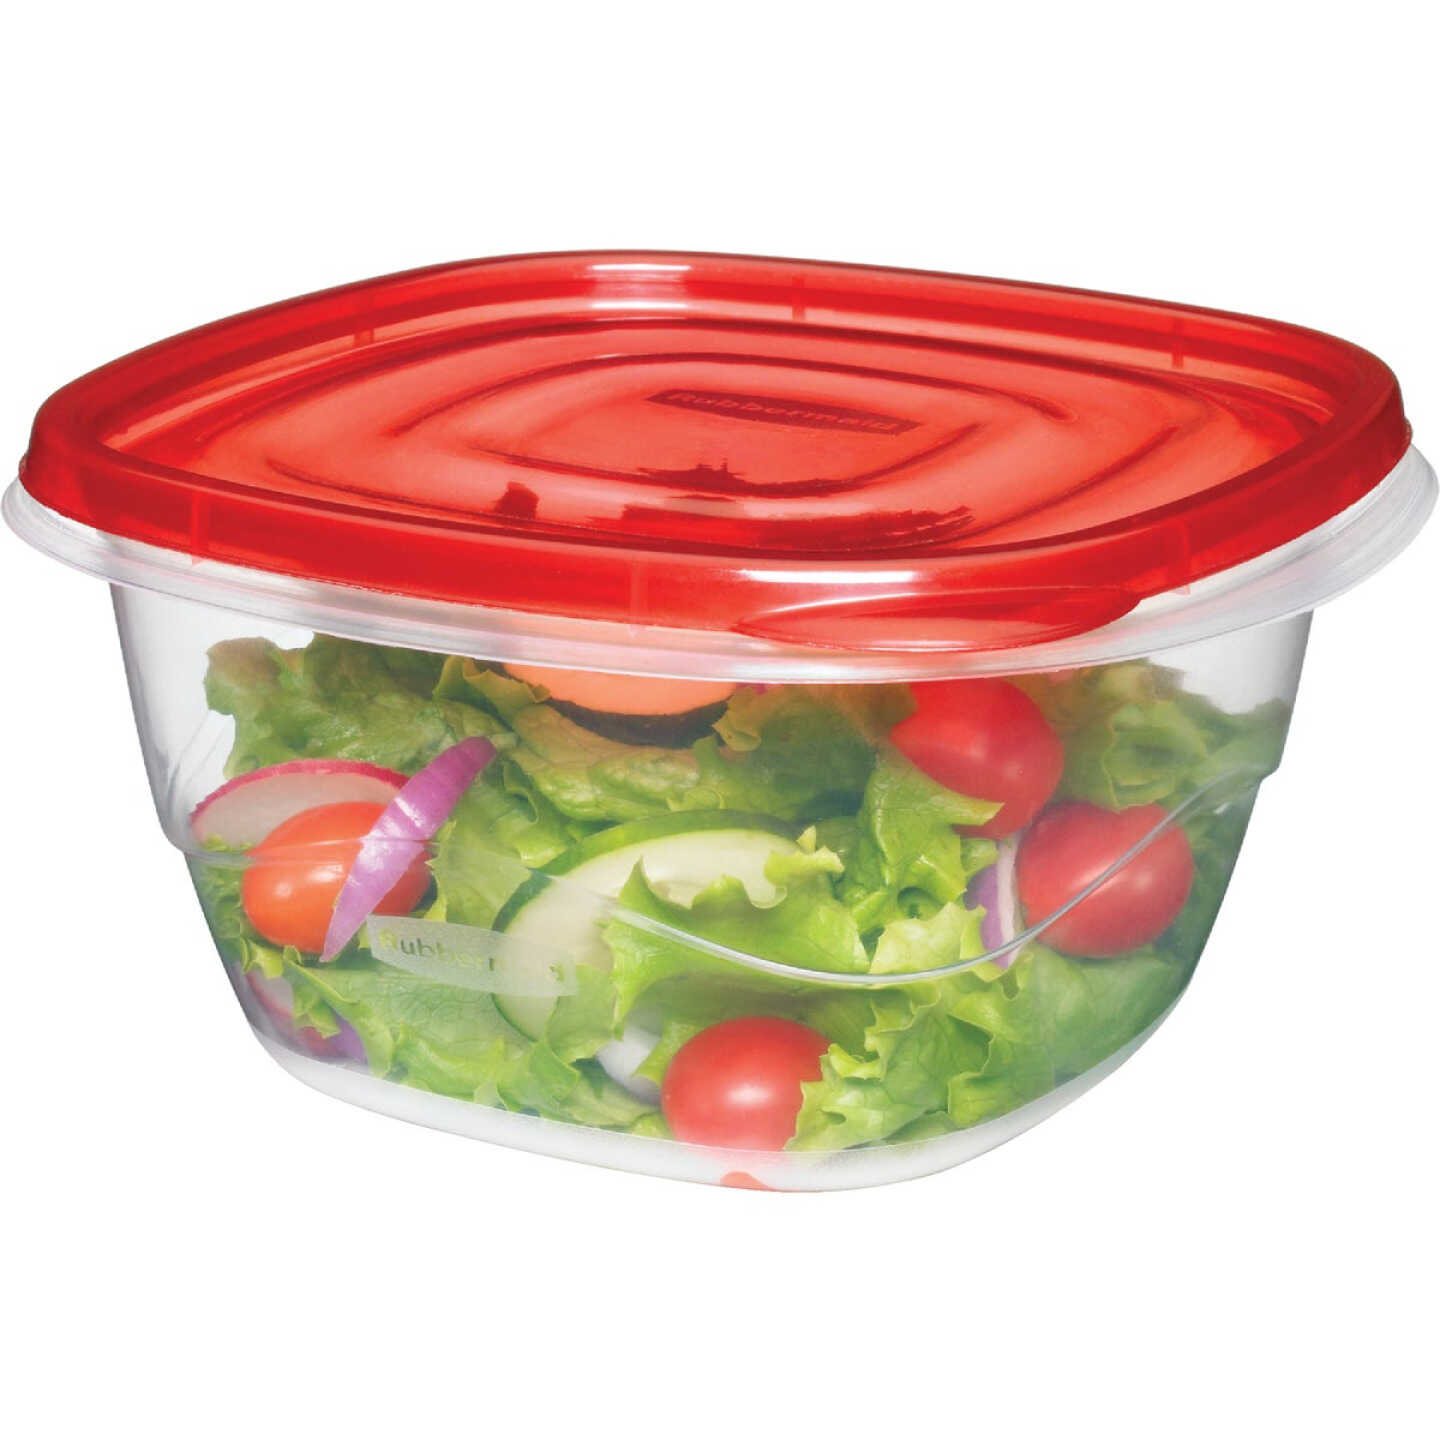 Glad Freezer Ware Containers & Lids Large Rectangle - 2 CT Glad